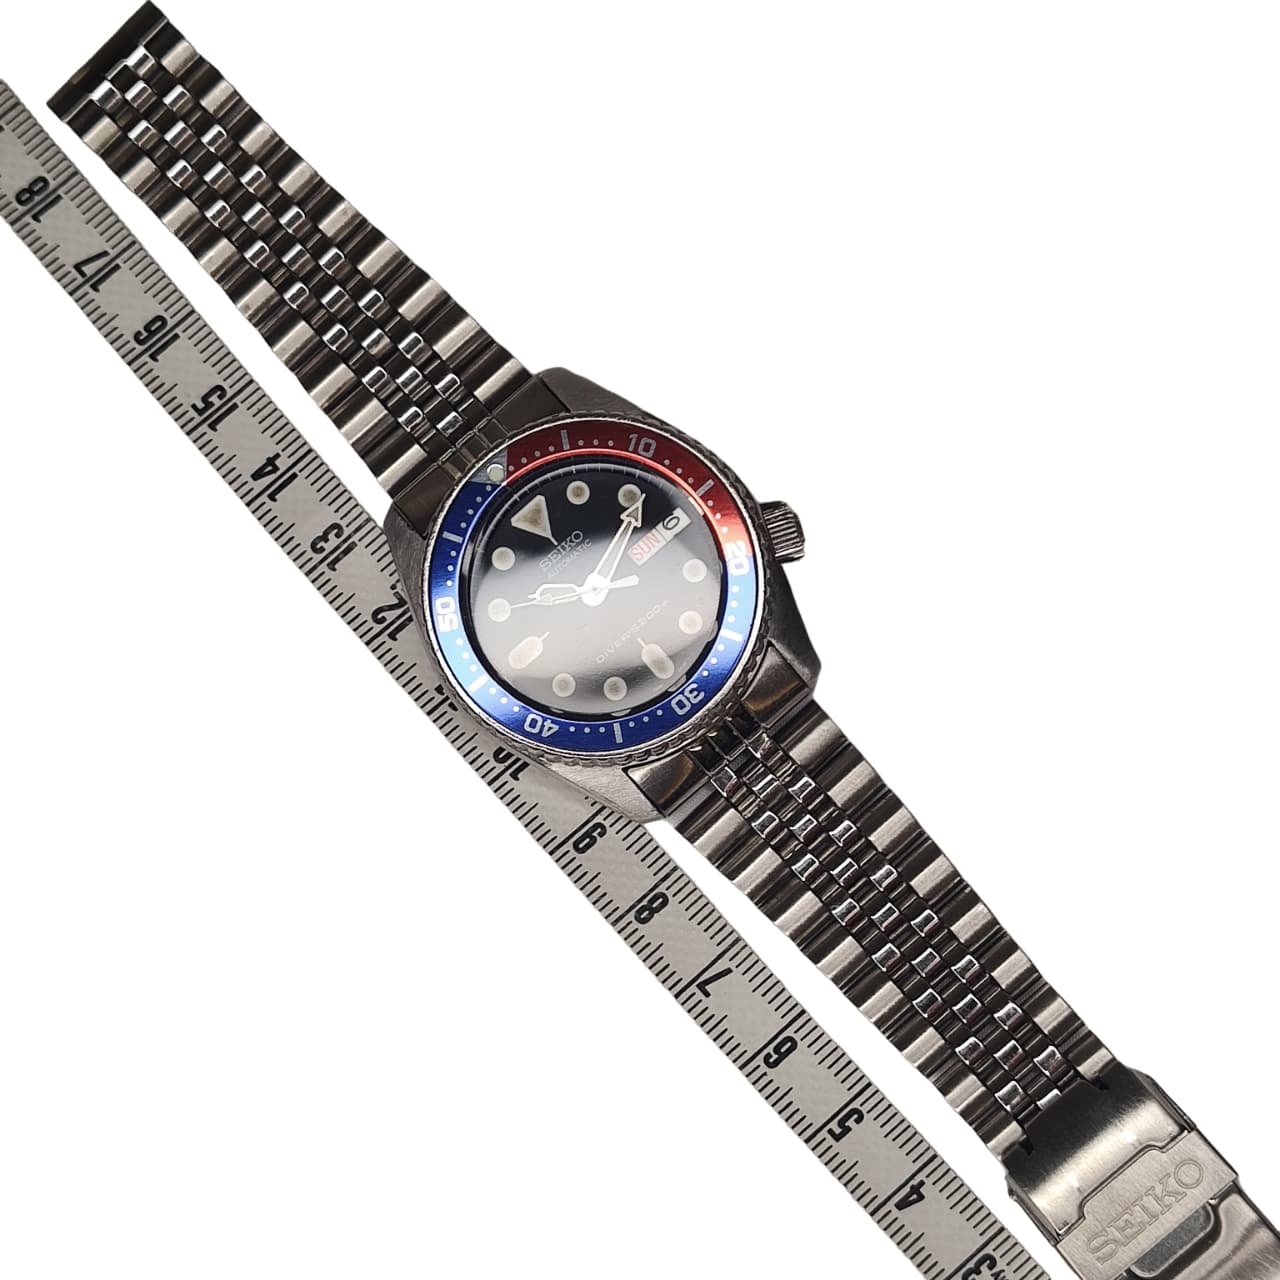 Seiko Pepsi Day & Date Automatic Diver – Temple of Time